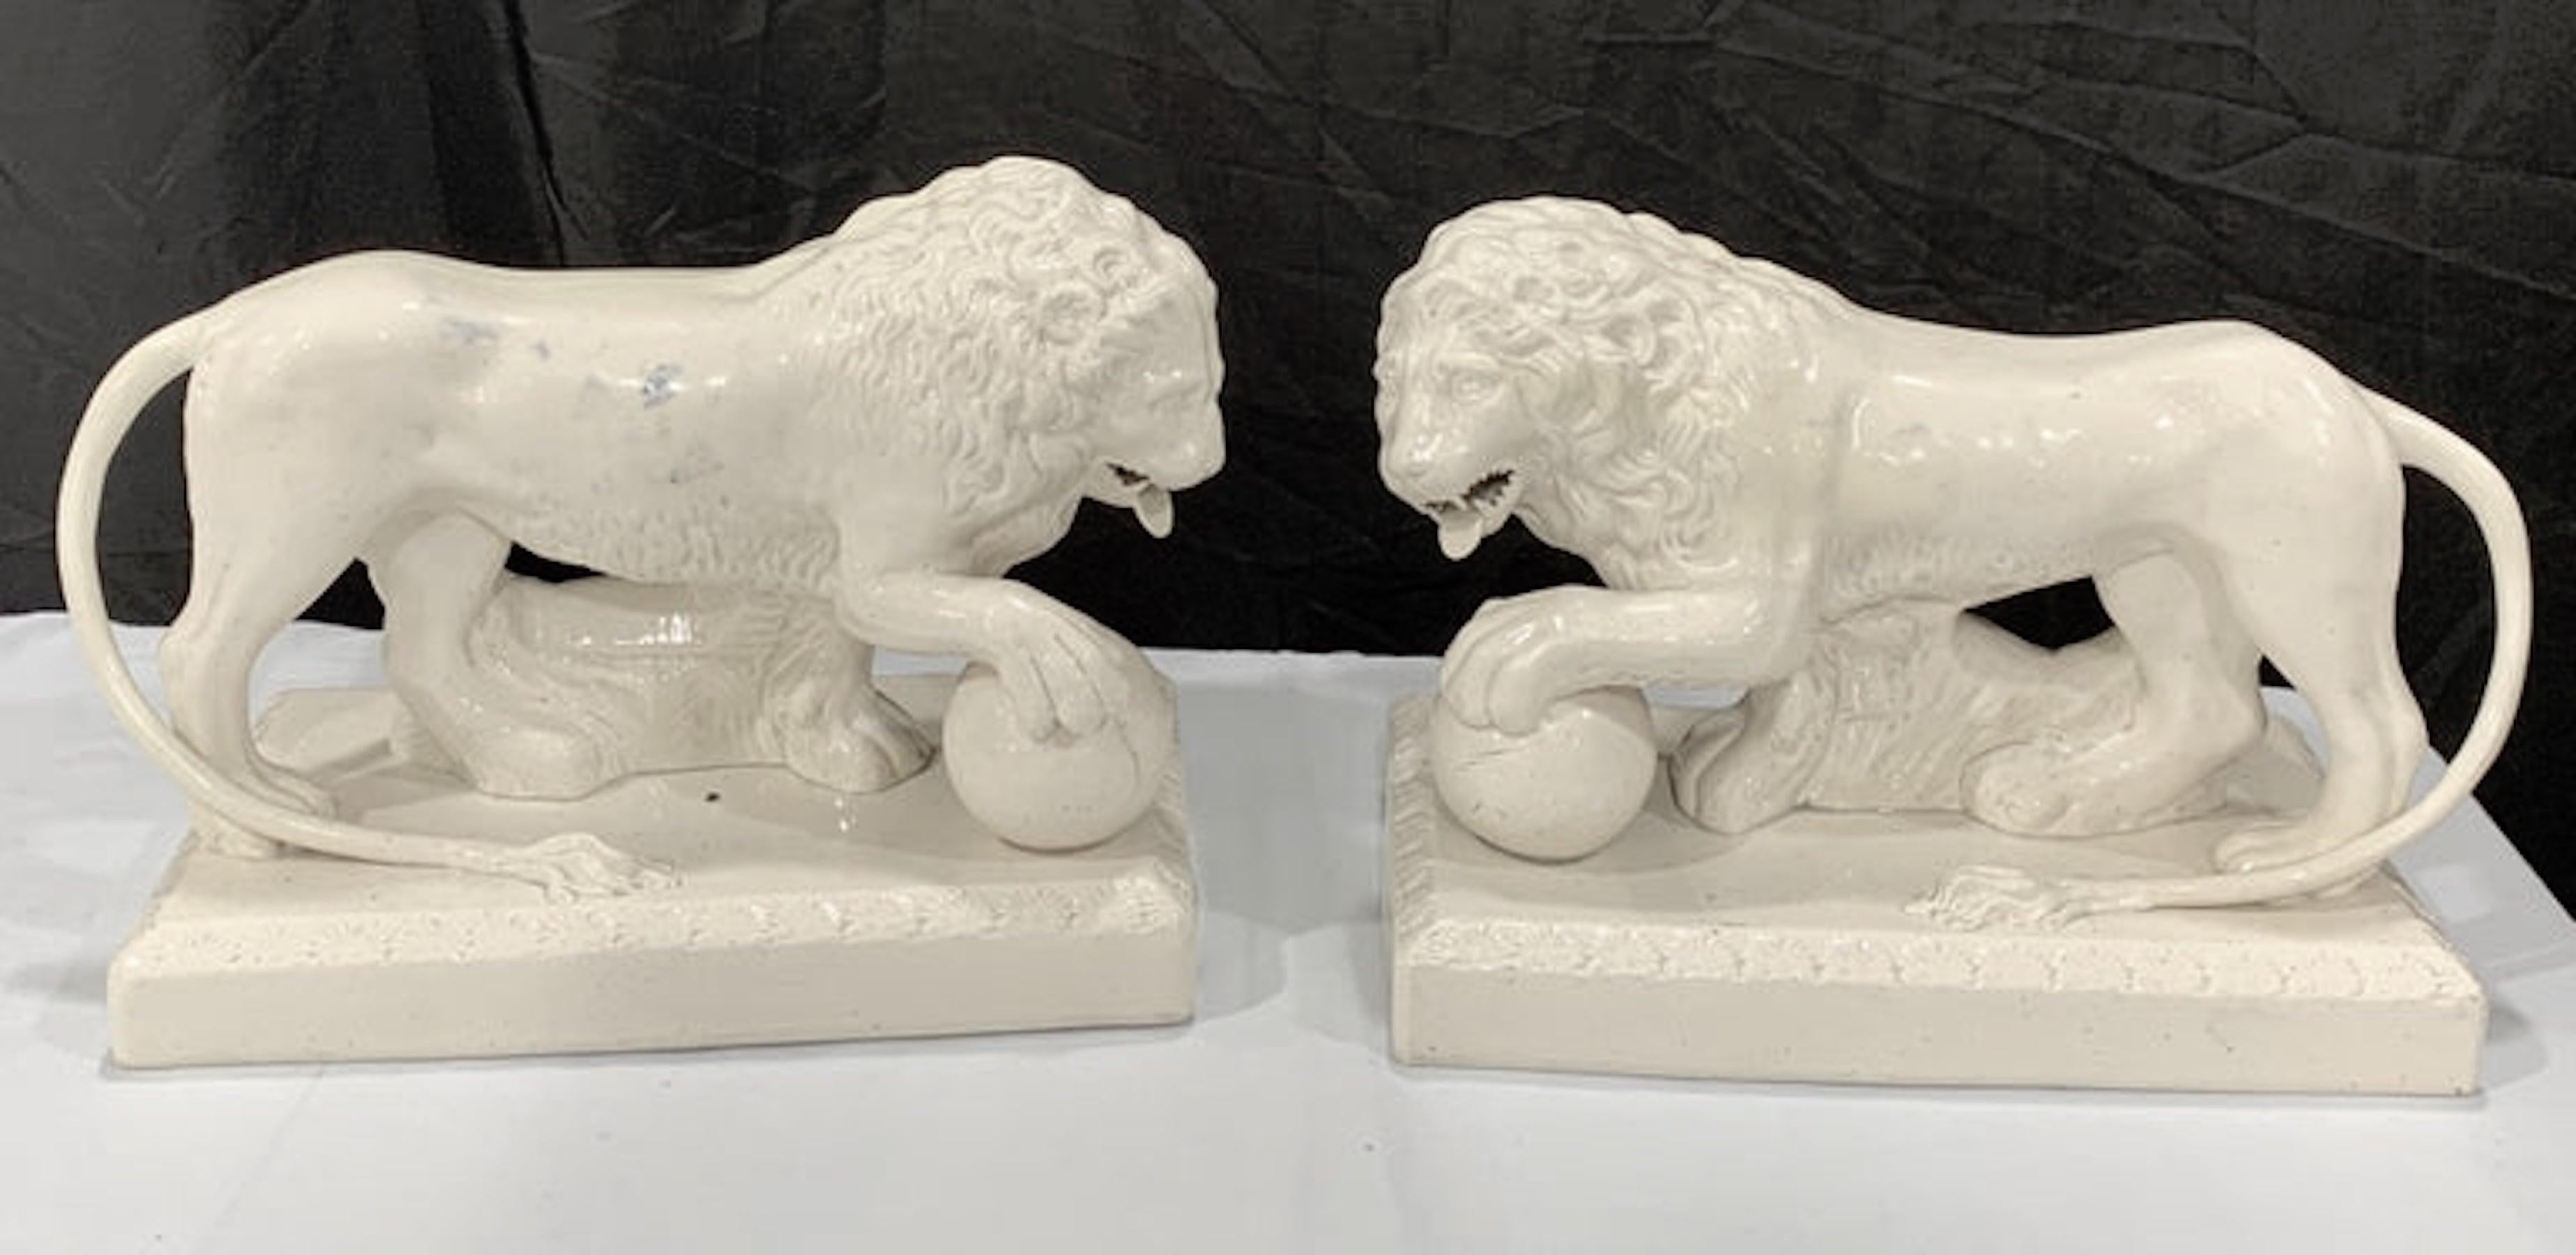 Pair of 19th century English creamware/pearlware model of the Medici Lions
A rare find, structurally sound, have some firing inclusions. Unmarked.